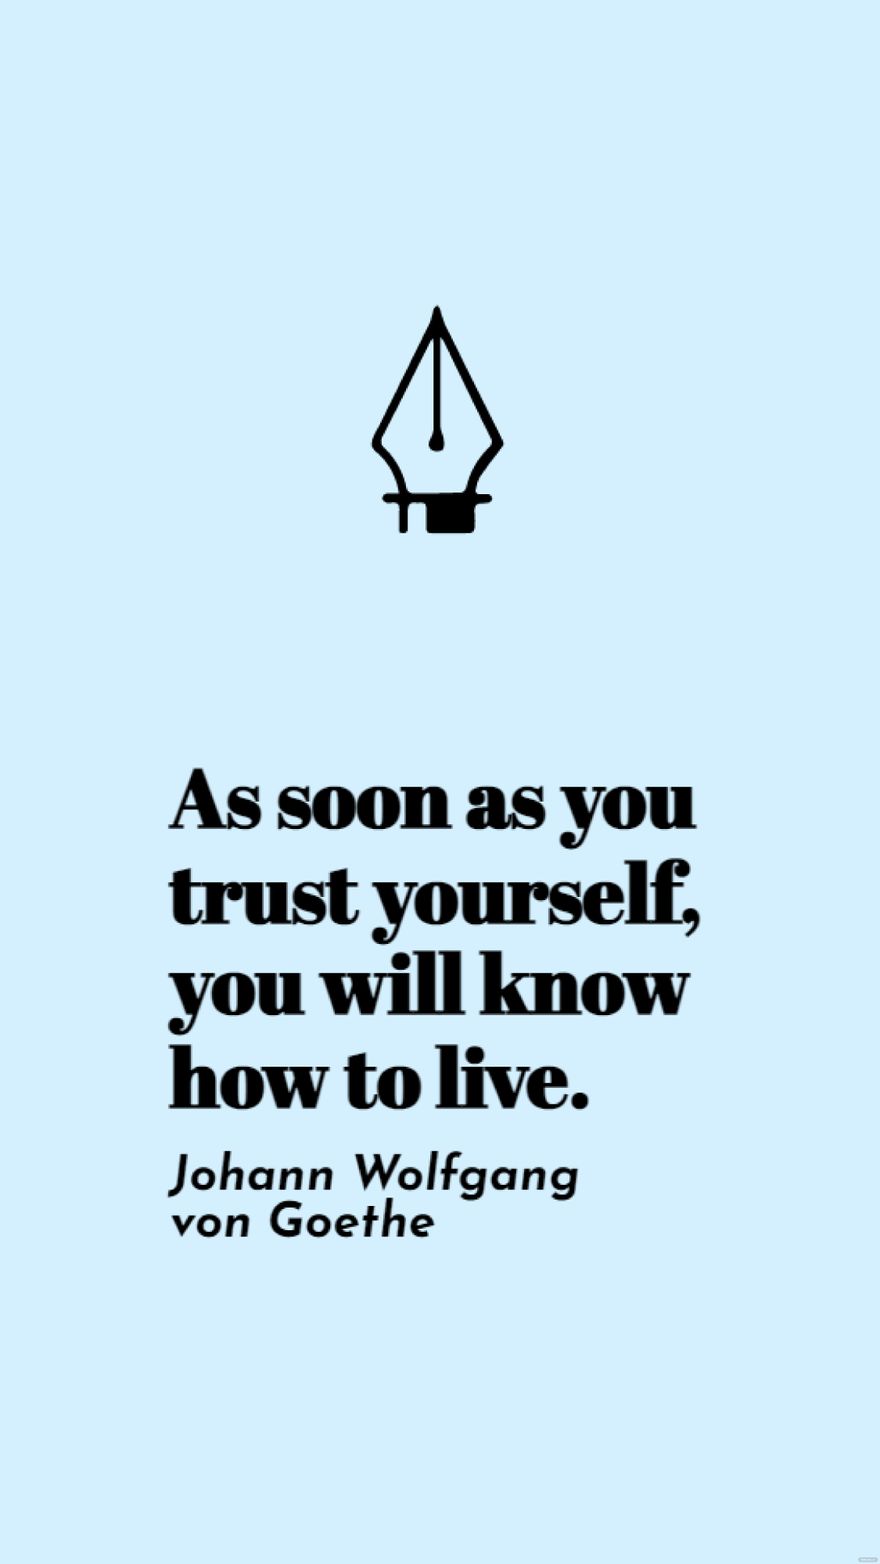 Johann Wolfgang von Goethe - As soon as you trust yourself, you will know how to live.